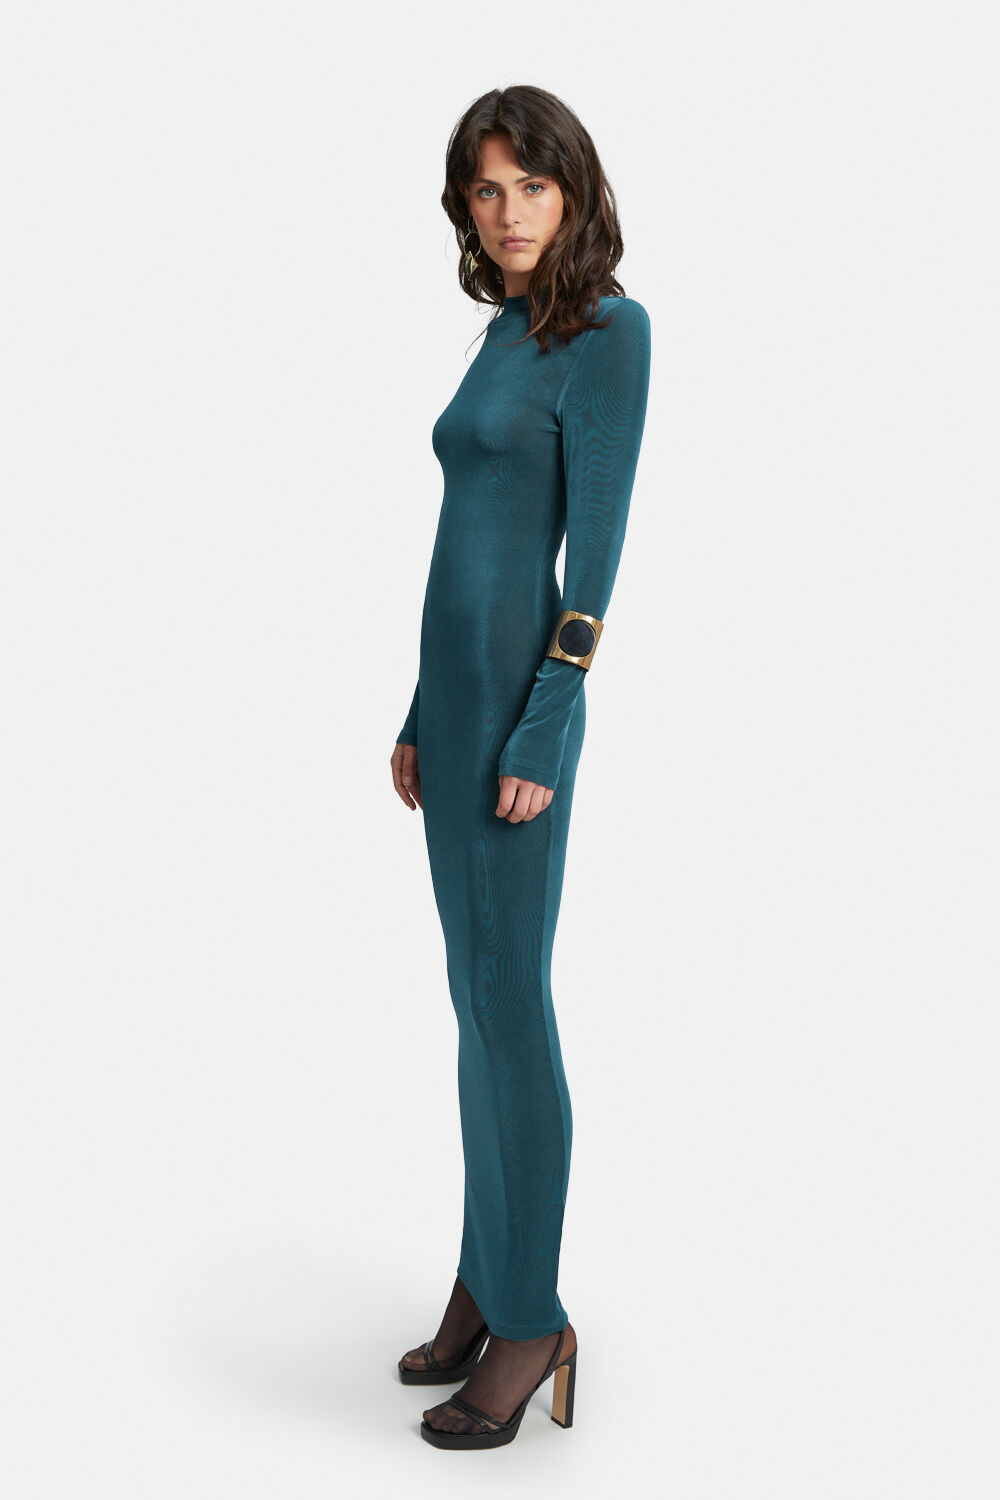 ARLO SLINKY KNIT DRESS in colour BAYBERRY